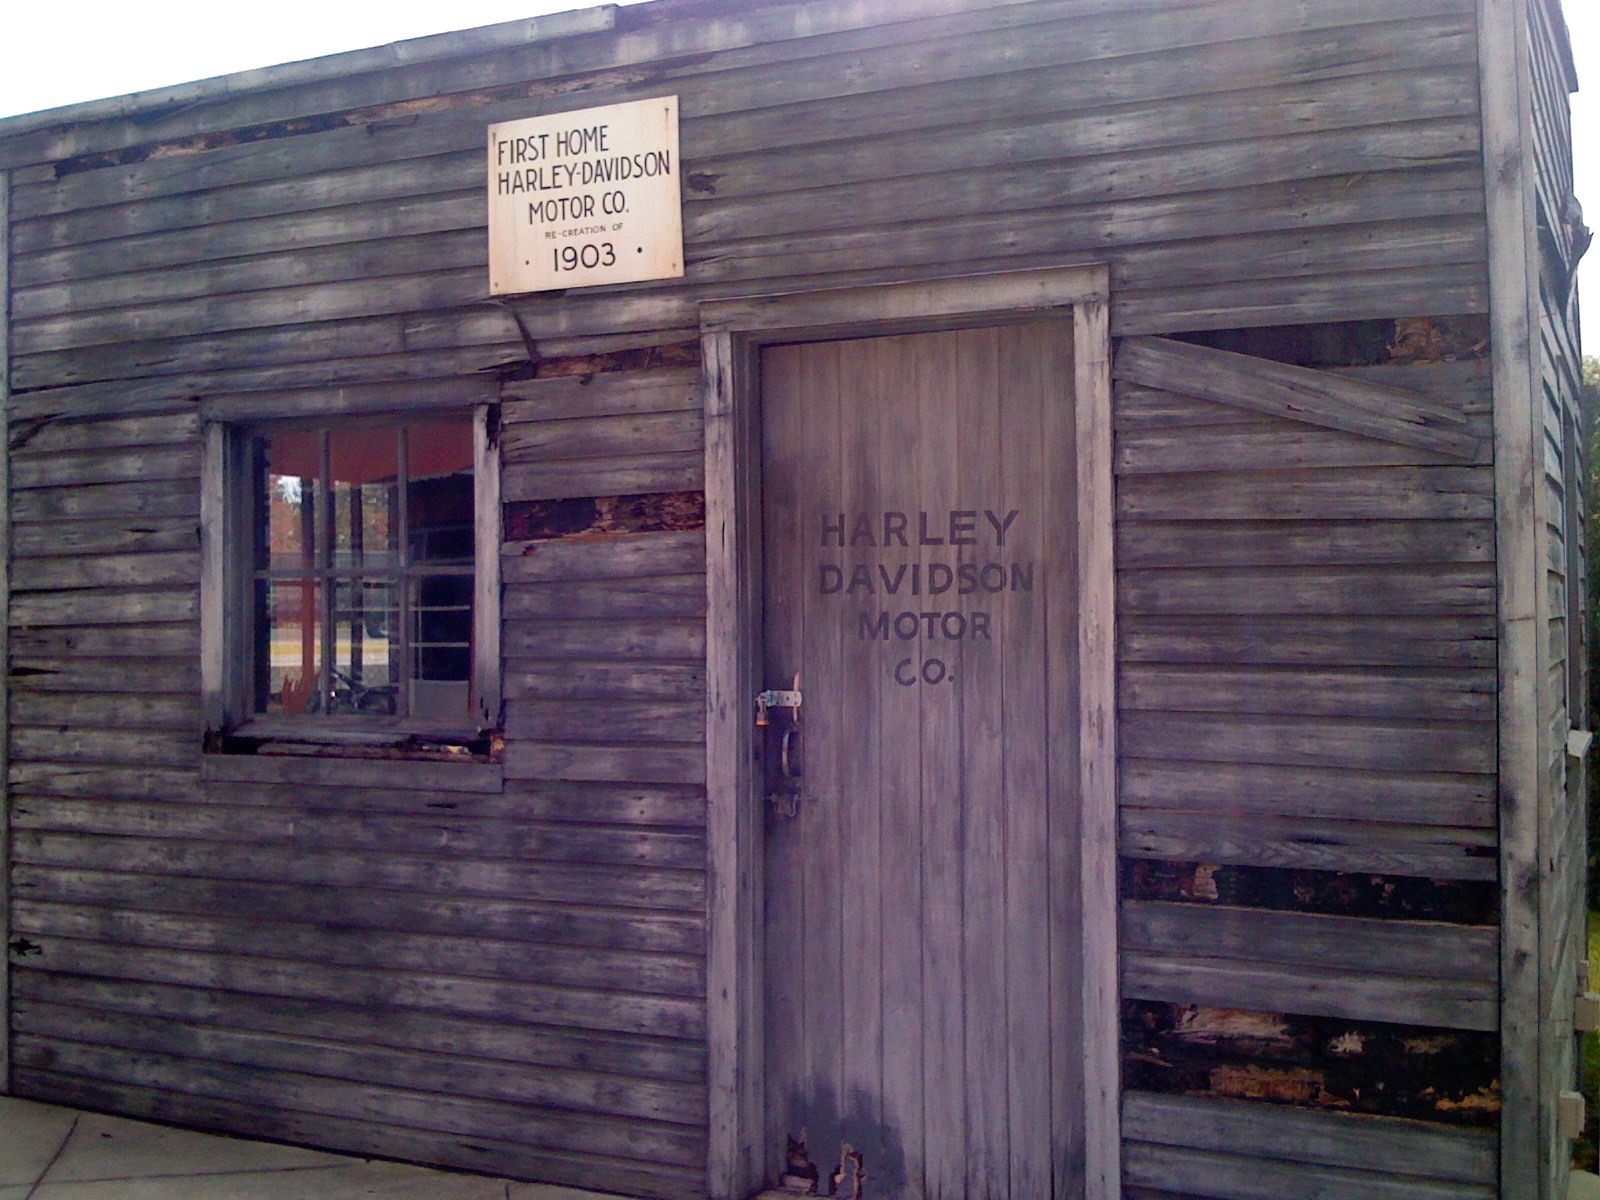 A replica of the first location where Harley Davidson got its start. Photo by J. Jeff Kober.